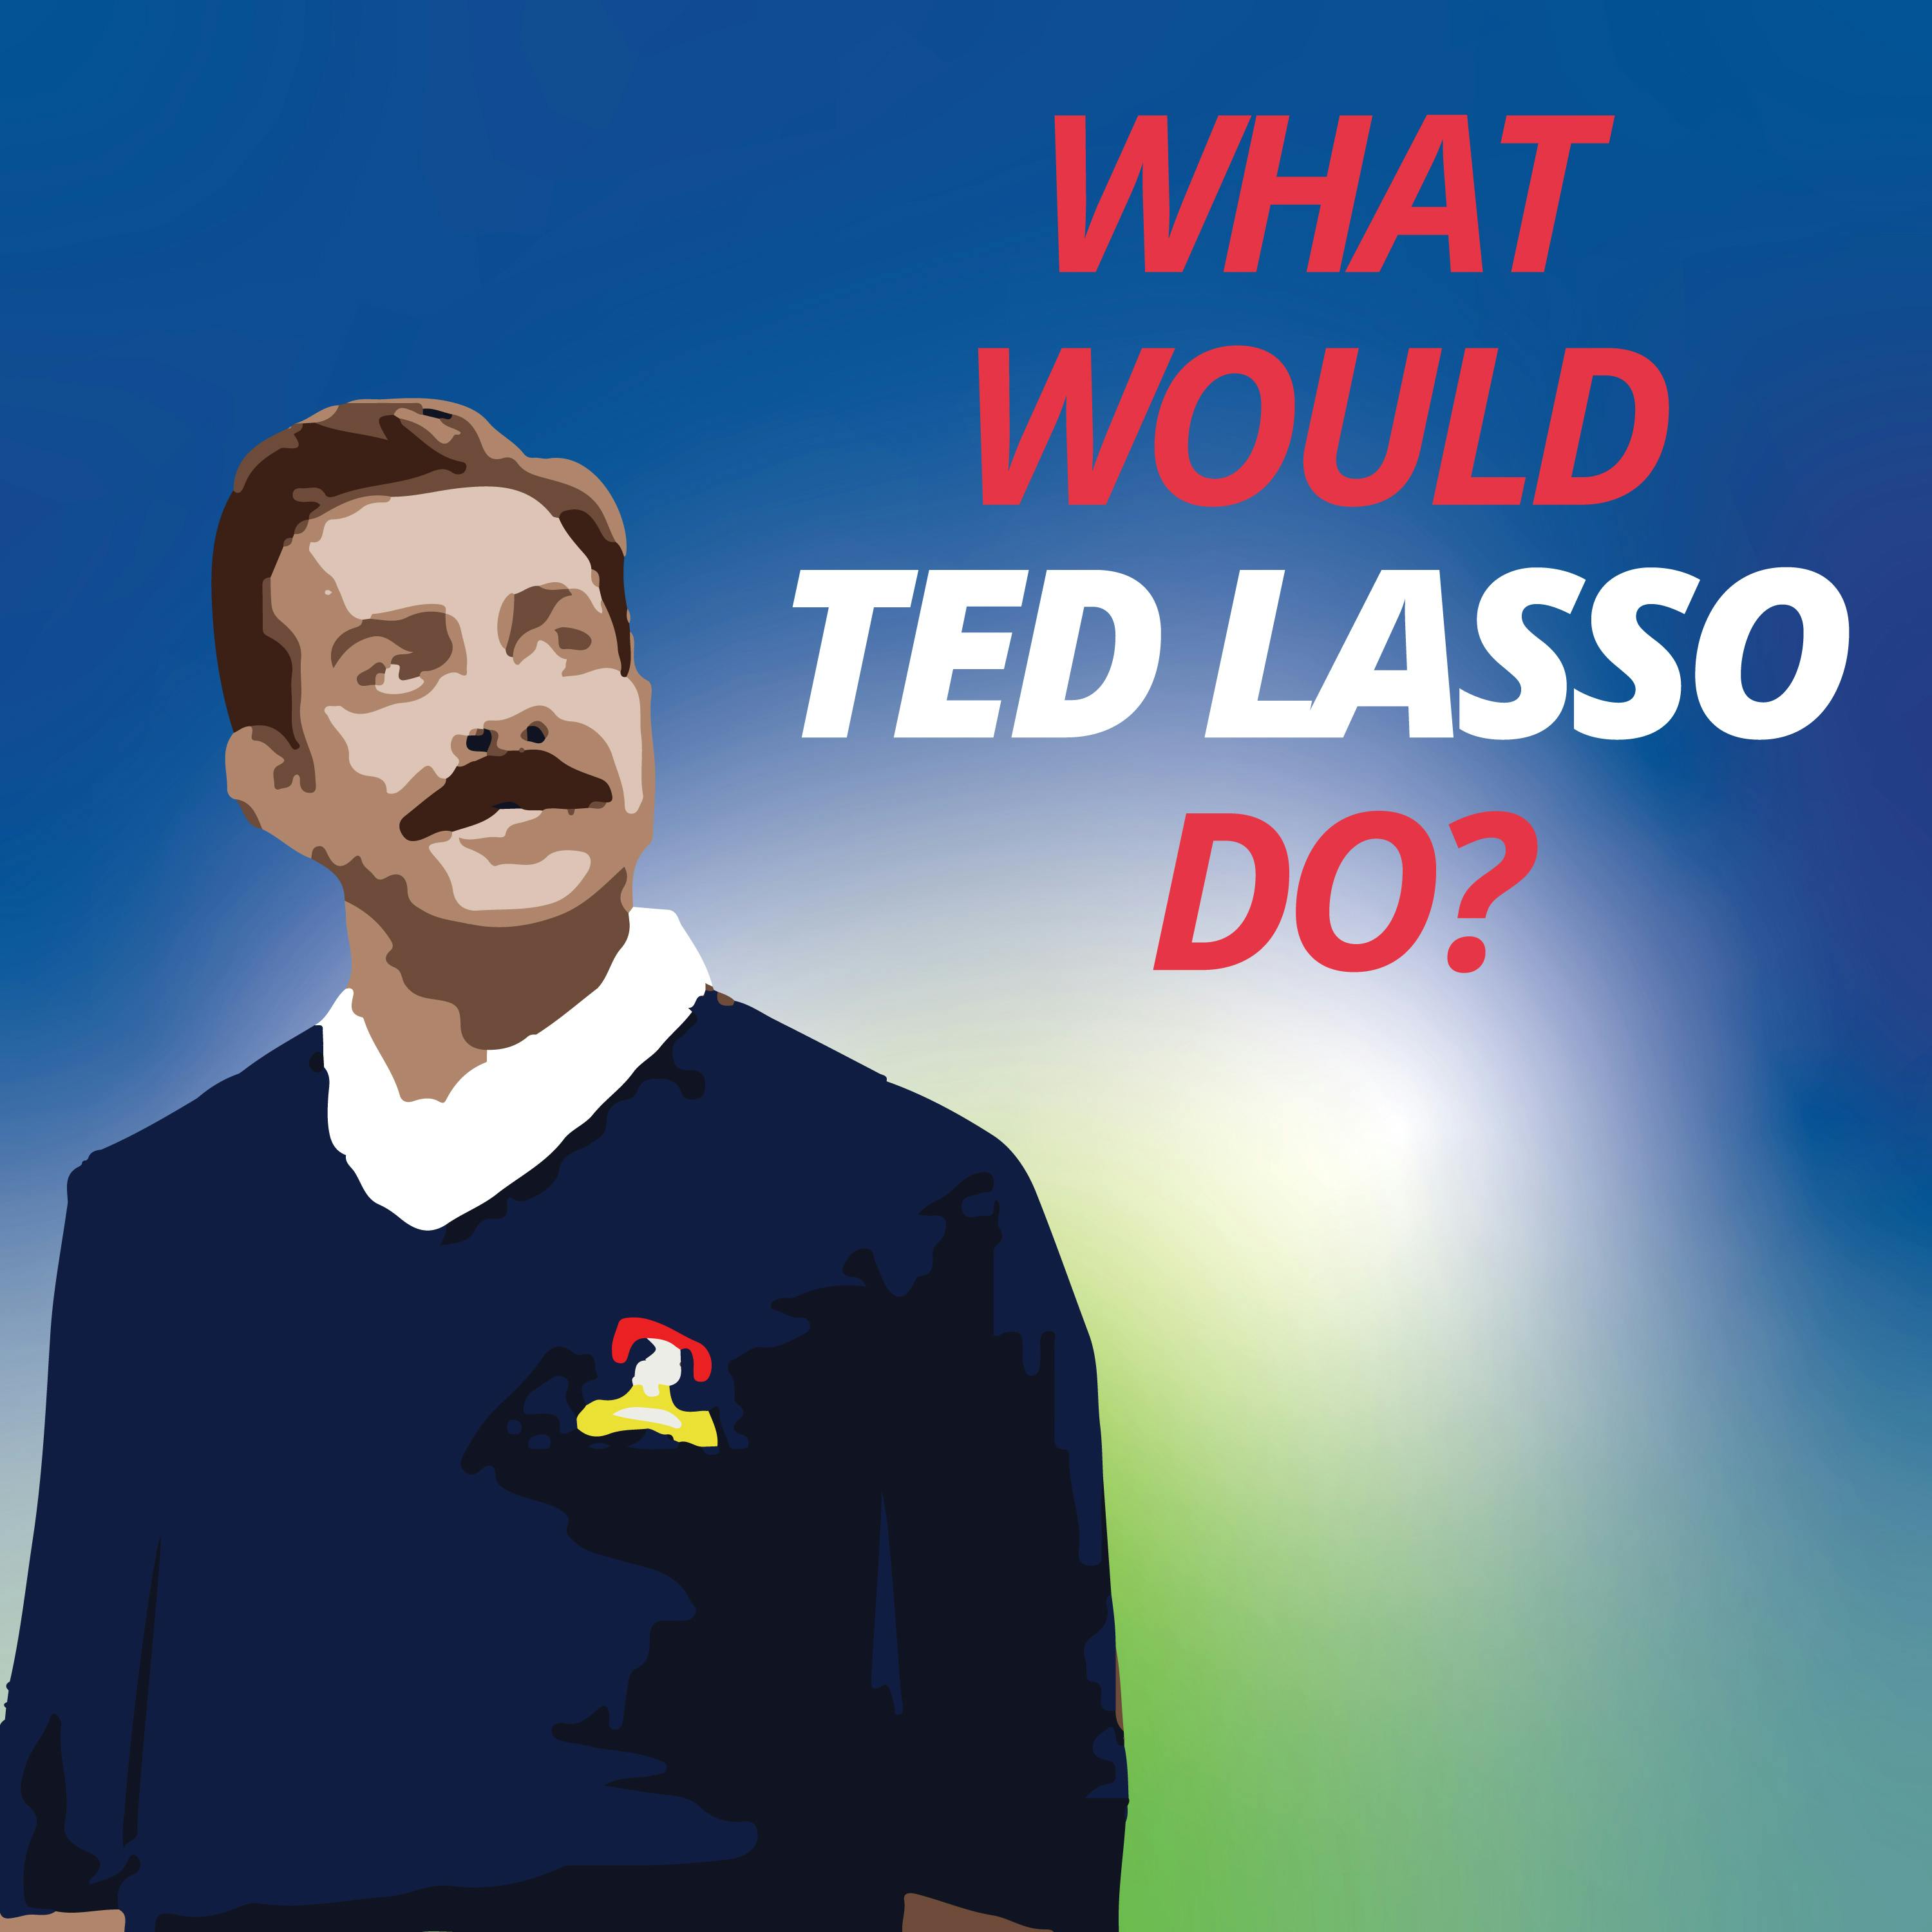 10 Facts You Need to Know About 'Ted Lasso